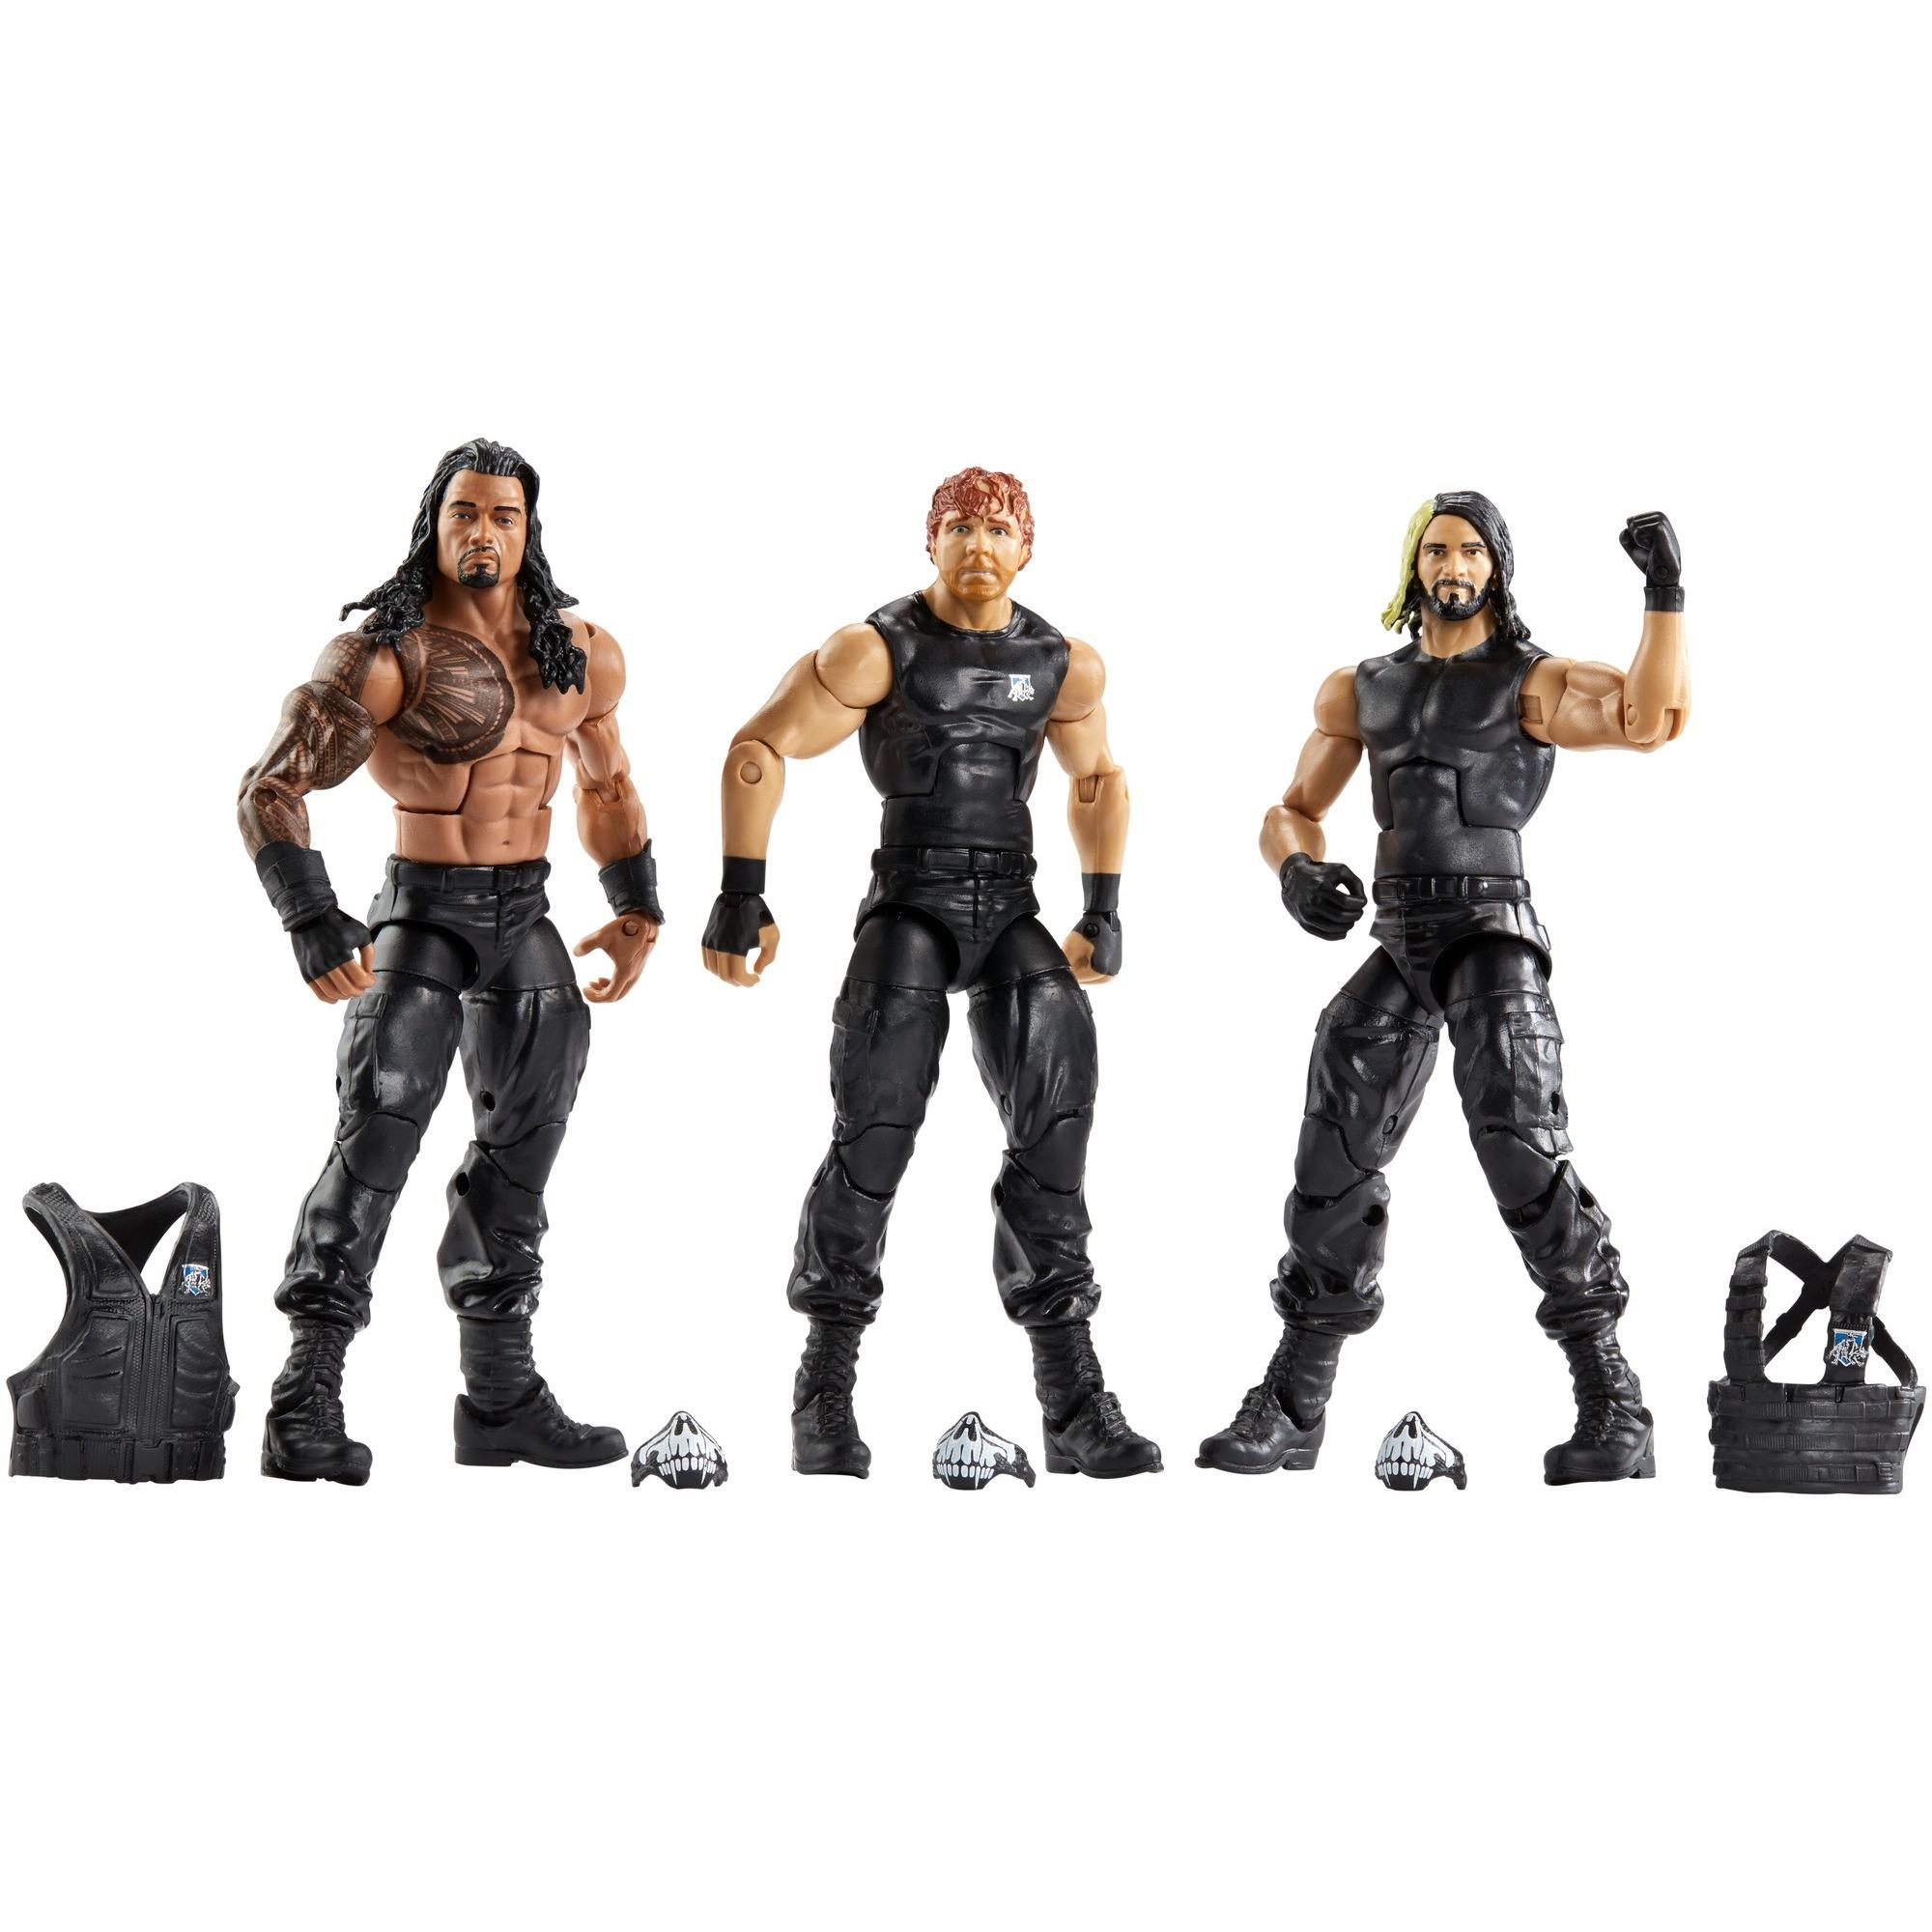 WWE Then Now Forever Elite 3 Pack (Walmart) (2017) 273b78be-e6c6-4c28-a53b-fbb1fb22770a_1.8c22c8ad41db3199ba42e77c33bf4556